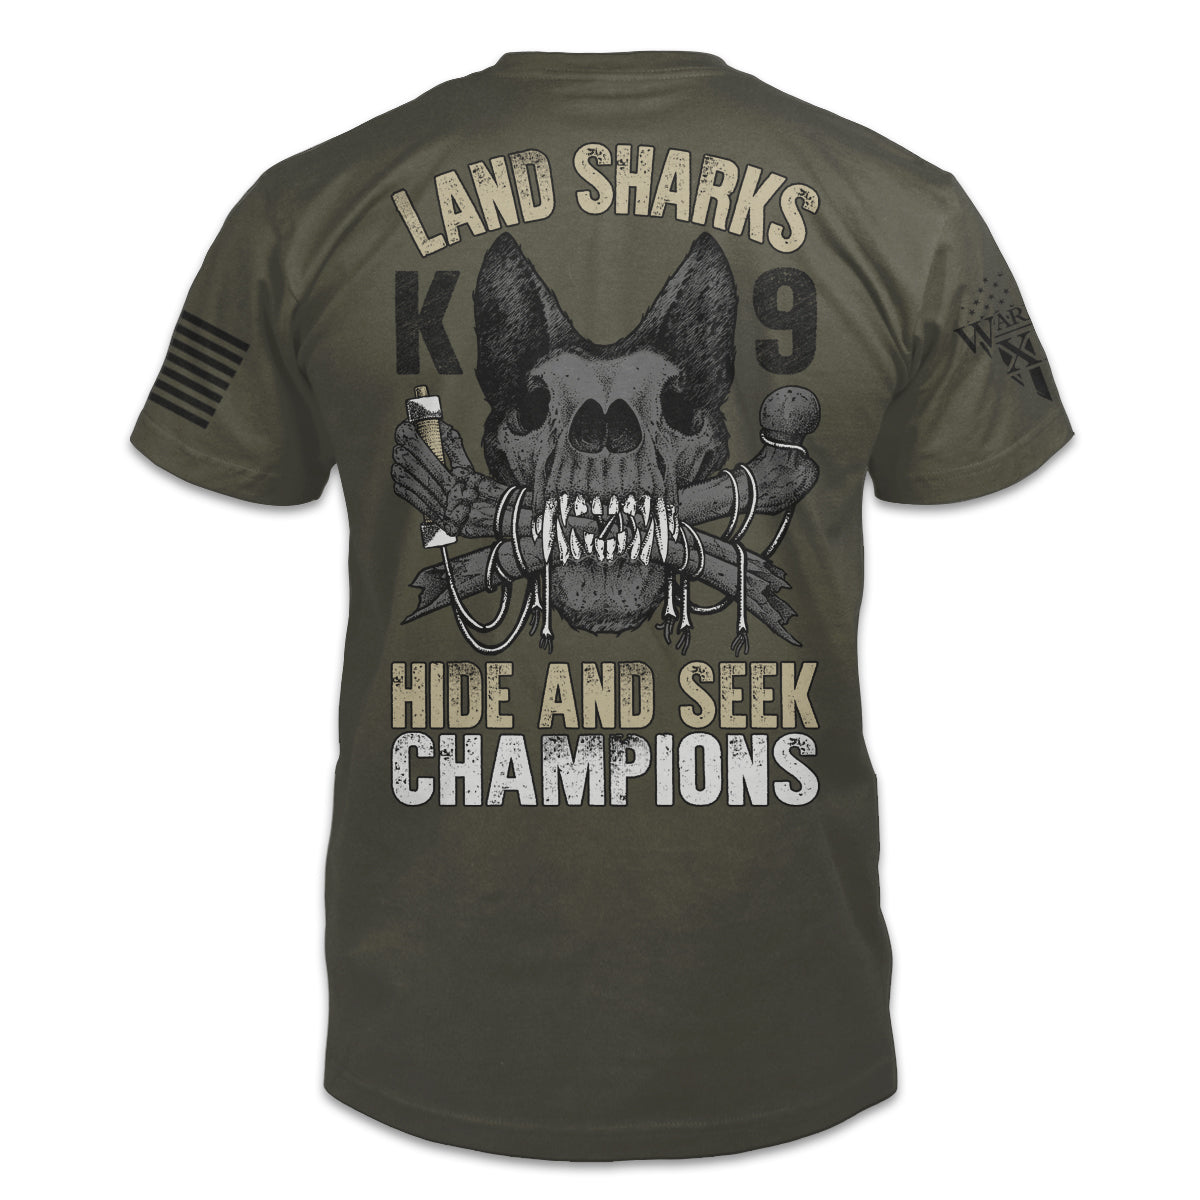 A olive green t-shirt with the words "land shark" and a the skeleton of k9 police dog printed on the back of the  shirt.